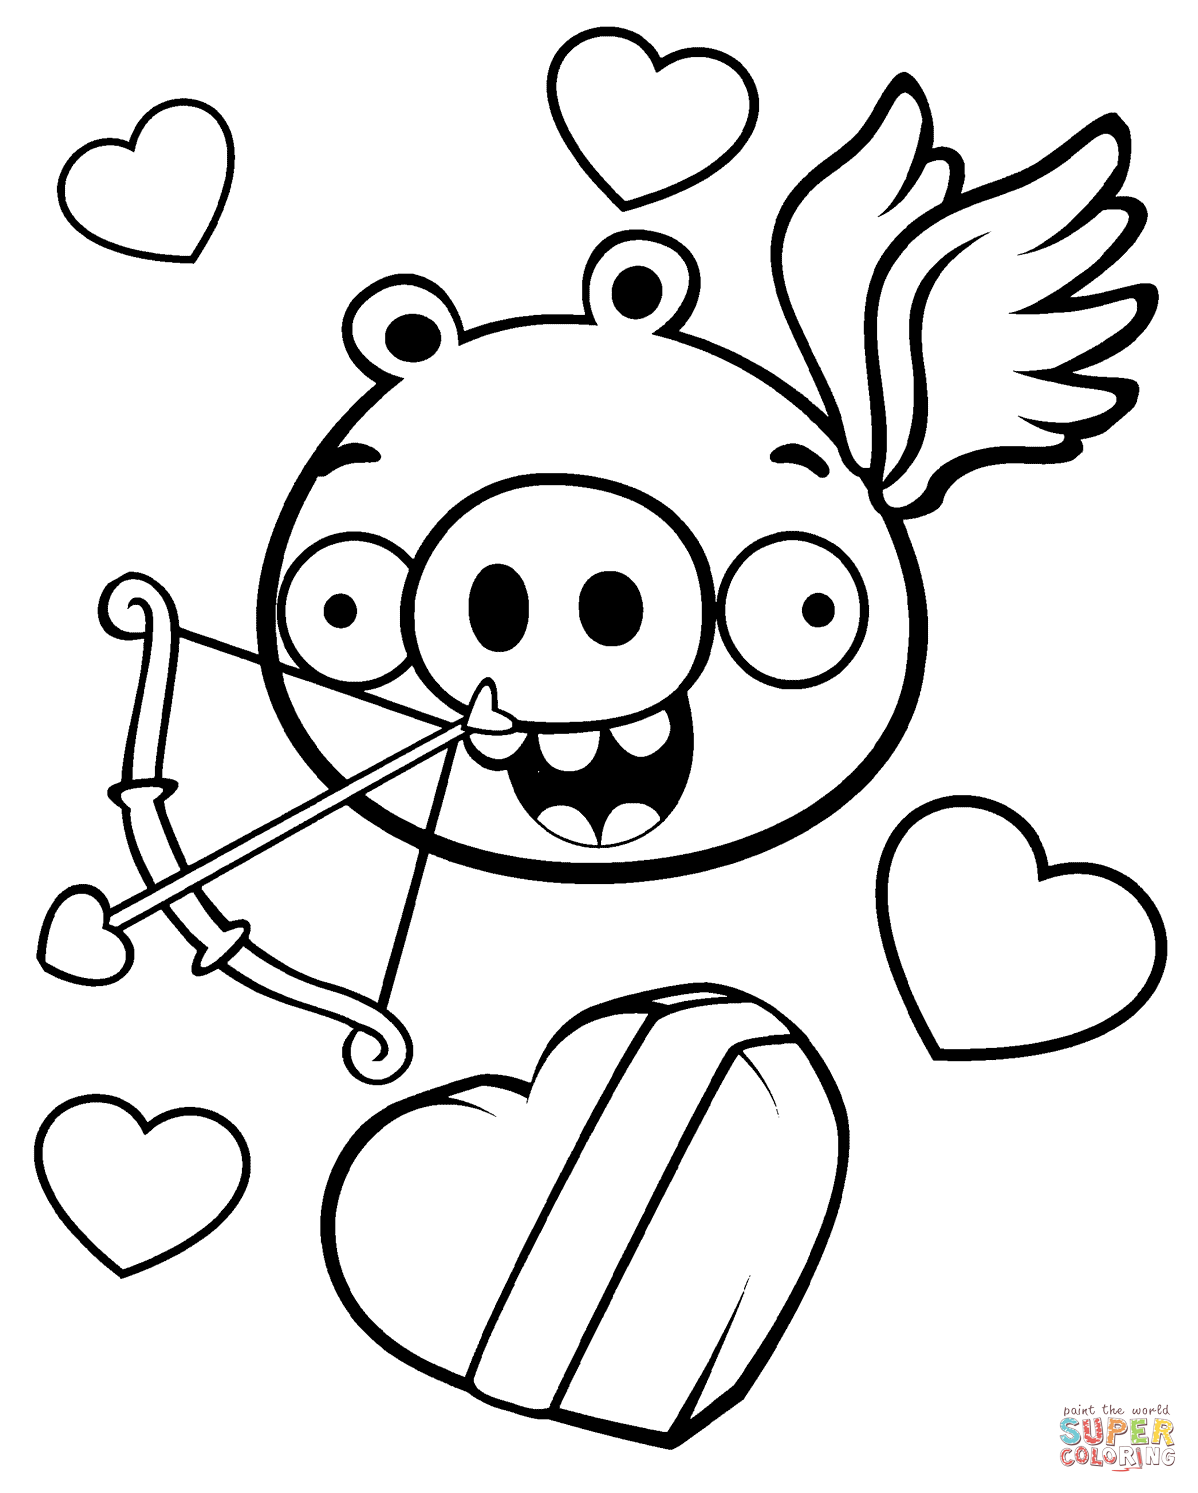 colouring pages angry birds go printable angry birds coloring pages for kids cool2bkids pages go colouring birds angry 